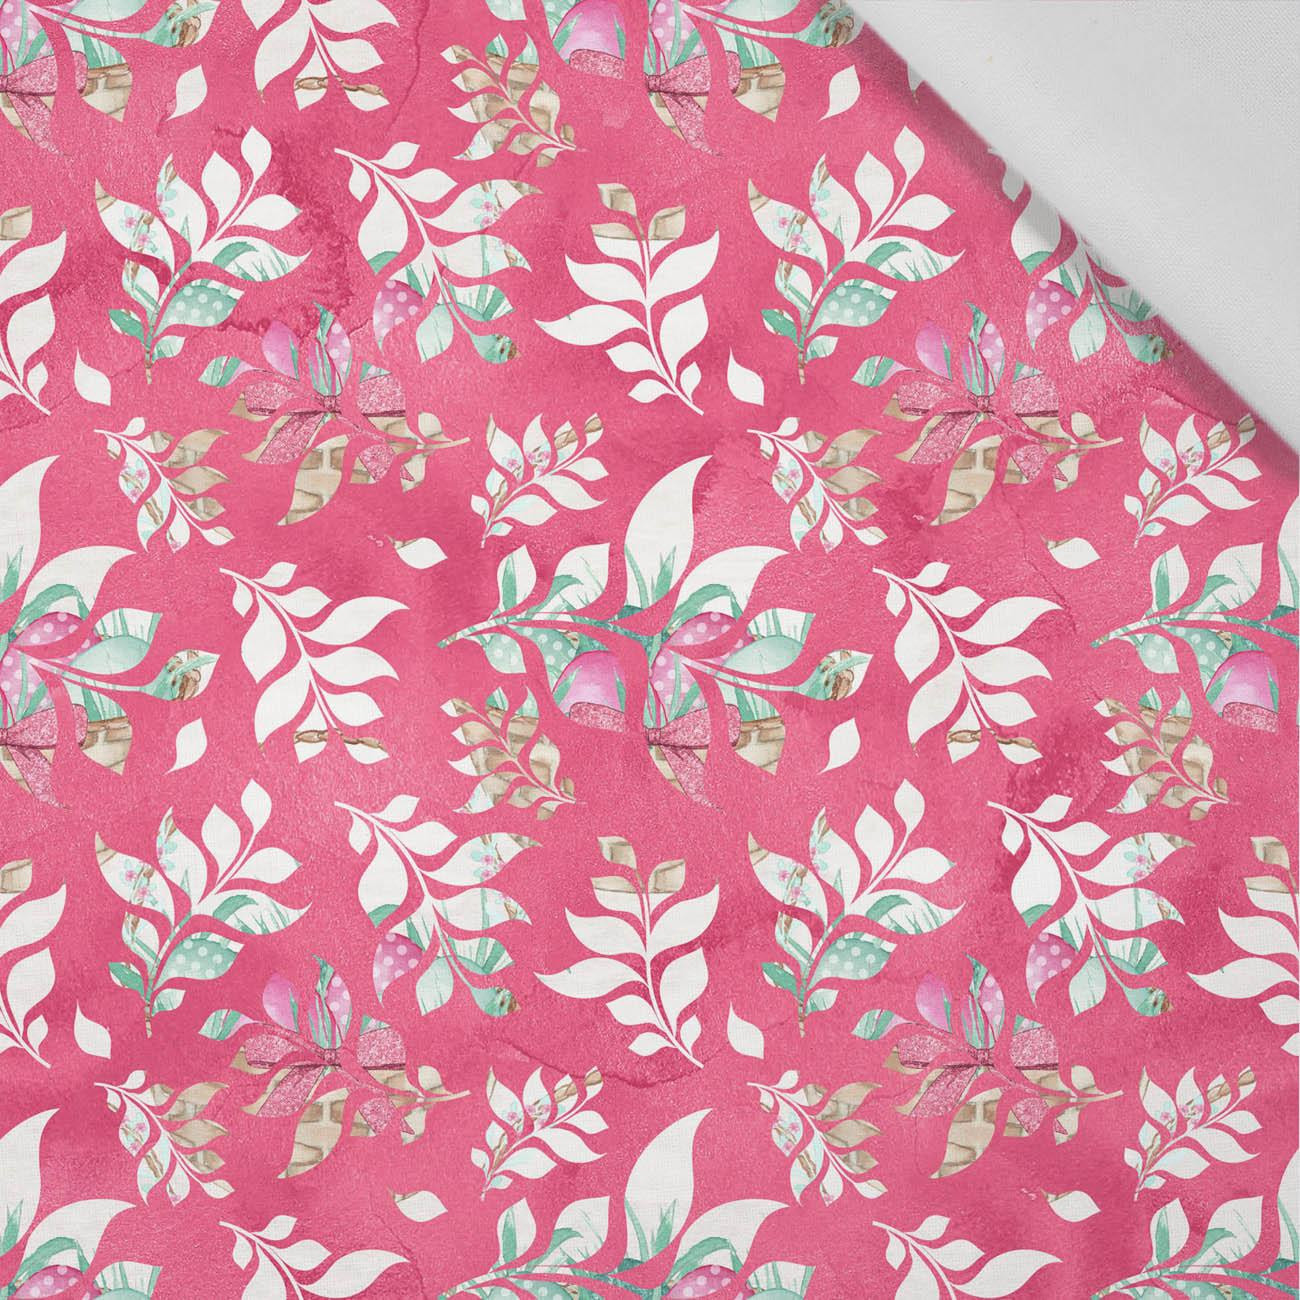 LEAVES pat 16 - Cotton woven fabric